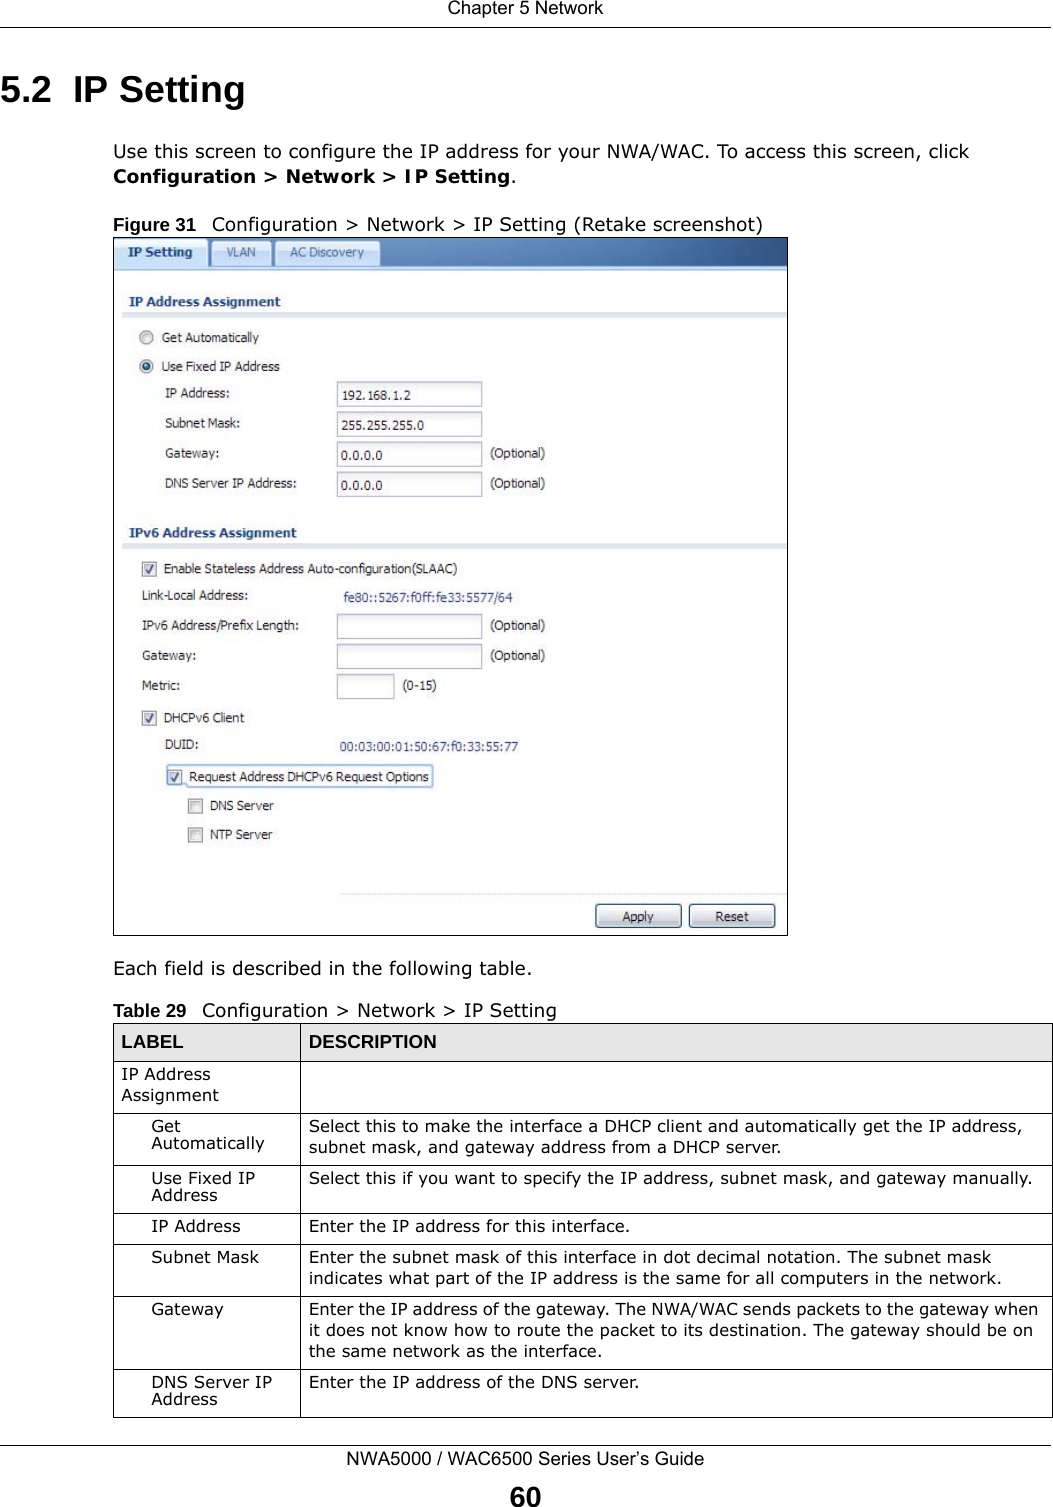 Chapter 5 NetworkNWA5000 / WAC6500 Series User’s Guide605.2  IP Setting Use this screen to configure the IP address for your NWA/WAC. To access this screen, click Configuration &gt; Network &gt; IP Setting.Figure 31   Configuration &gt; Network &gt; IP Setting (Retake screenshot)     Each field is described in the following table.  Table 29   Configuration &gt; Network &gt; IP SettingLABEL  DESCRIPTIONIP Address AssignmentGet Automatically Select this to make the interface a DHCP client and automatically get the IP address, subnet mask, and gateway address from a DHCP server.Use Fixed IP Address Select this if you want to specify the IP address, subnet mask, and gateway manually. IP Address Enter the IP address for this interface.Subnet Mask Enter the subnet mask of this interface in dot decimal notation. The subnet mask indicates what part of the IP address is the same for all computers in the network.Gateway Enter the IP address of the gateway. The NWA/WAC sends packets to the gateway when it does not know how to route the packet to its destination. The gateway should be on the same network as the interface.DNS Server IP Address Enter the IP address of the DNS server.